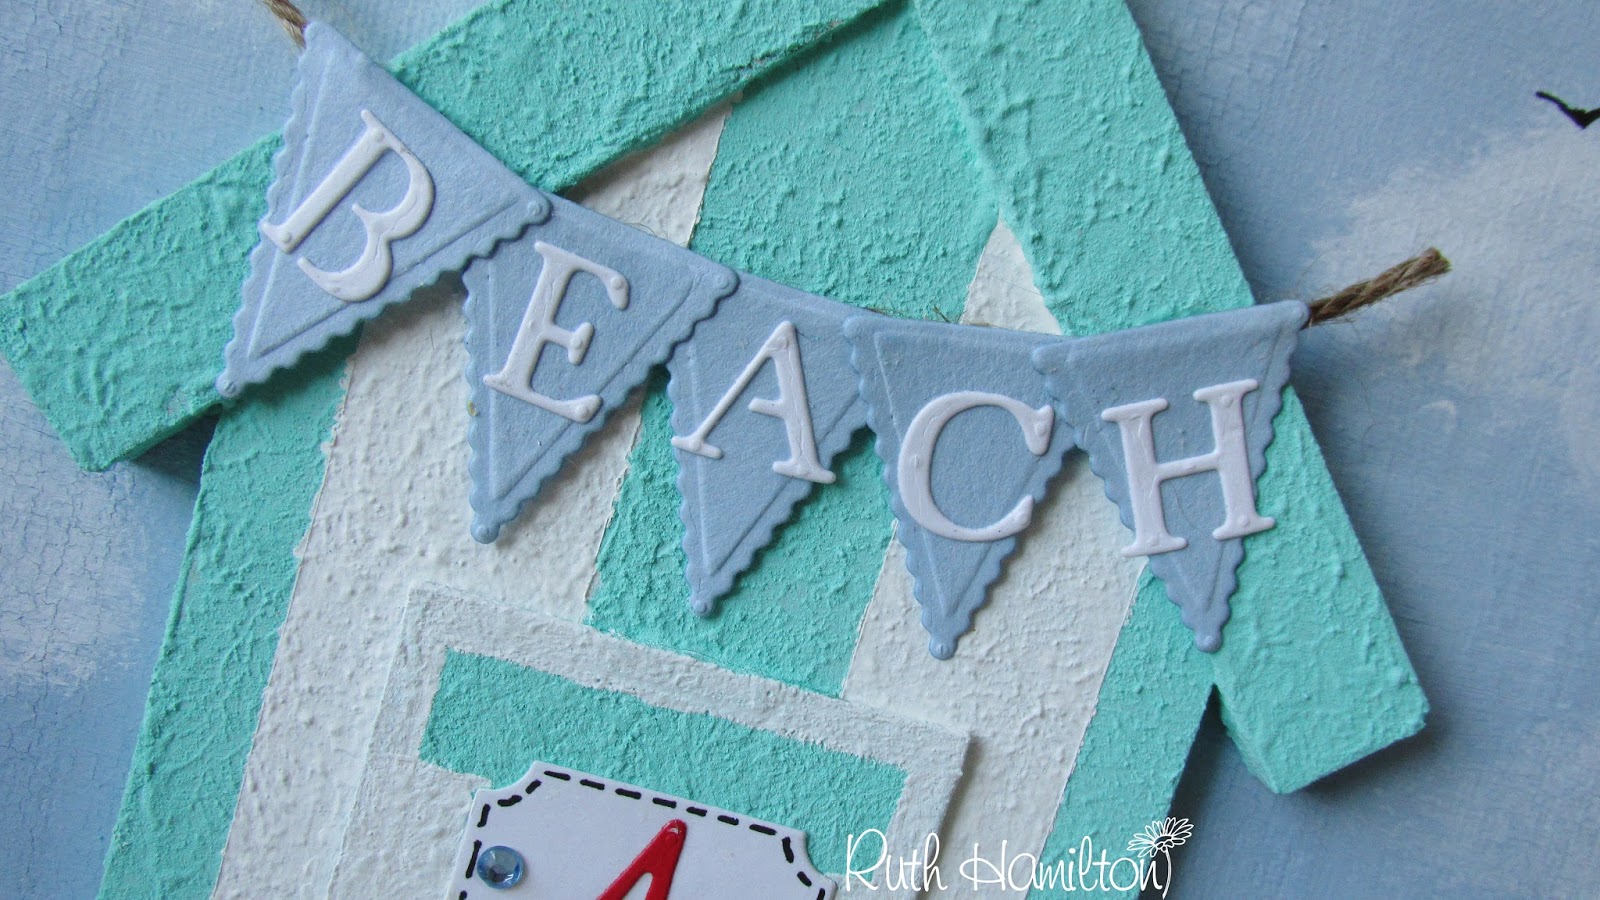 A Passion For Cards: Folk Art Coastal Texture Paint from Plaid